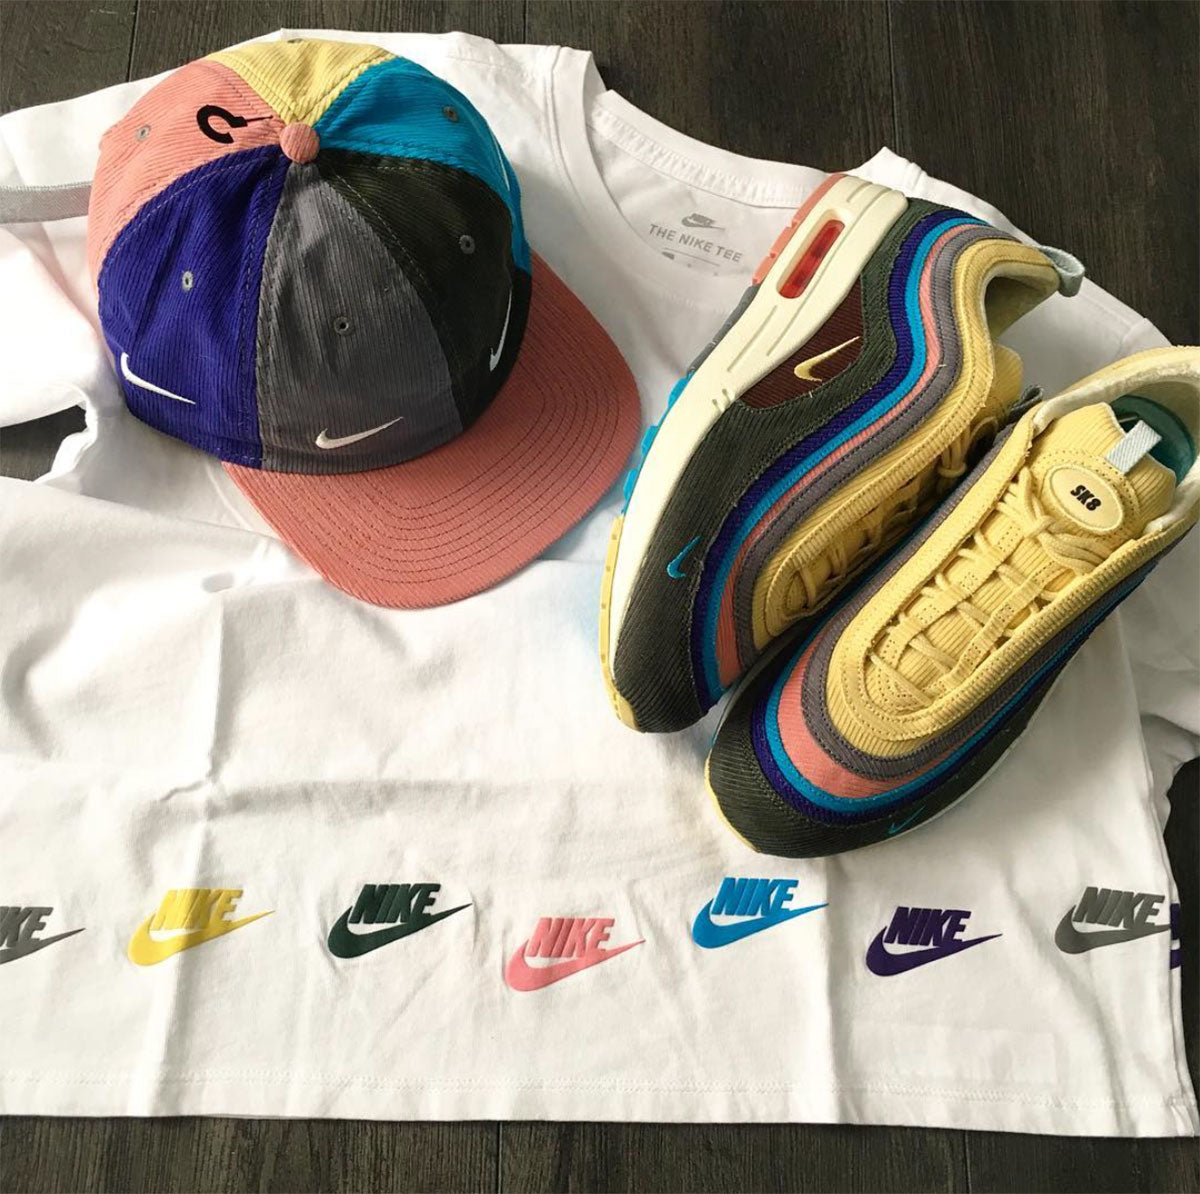 Nike x Sean Wotherspoon AM97/1